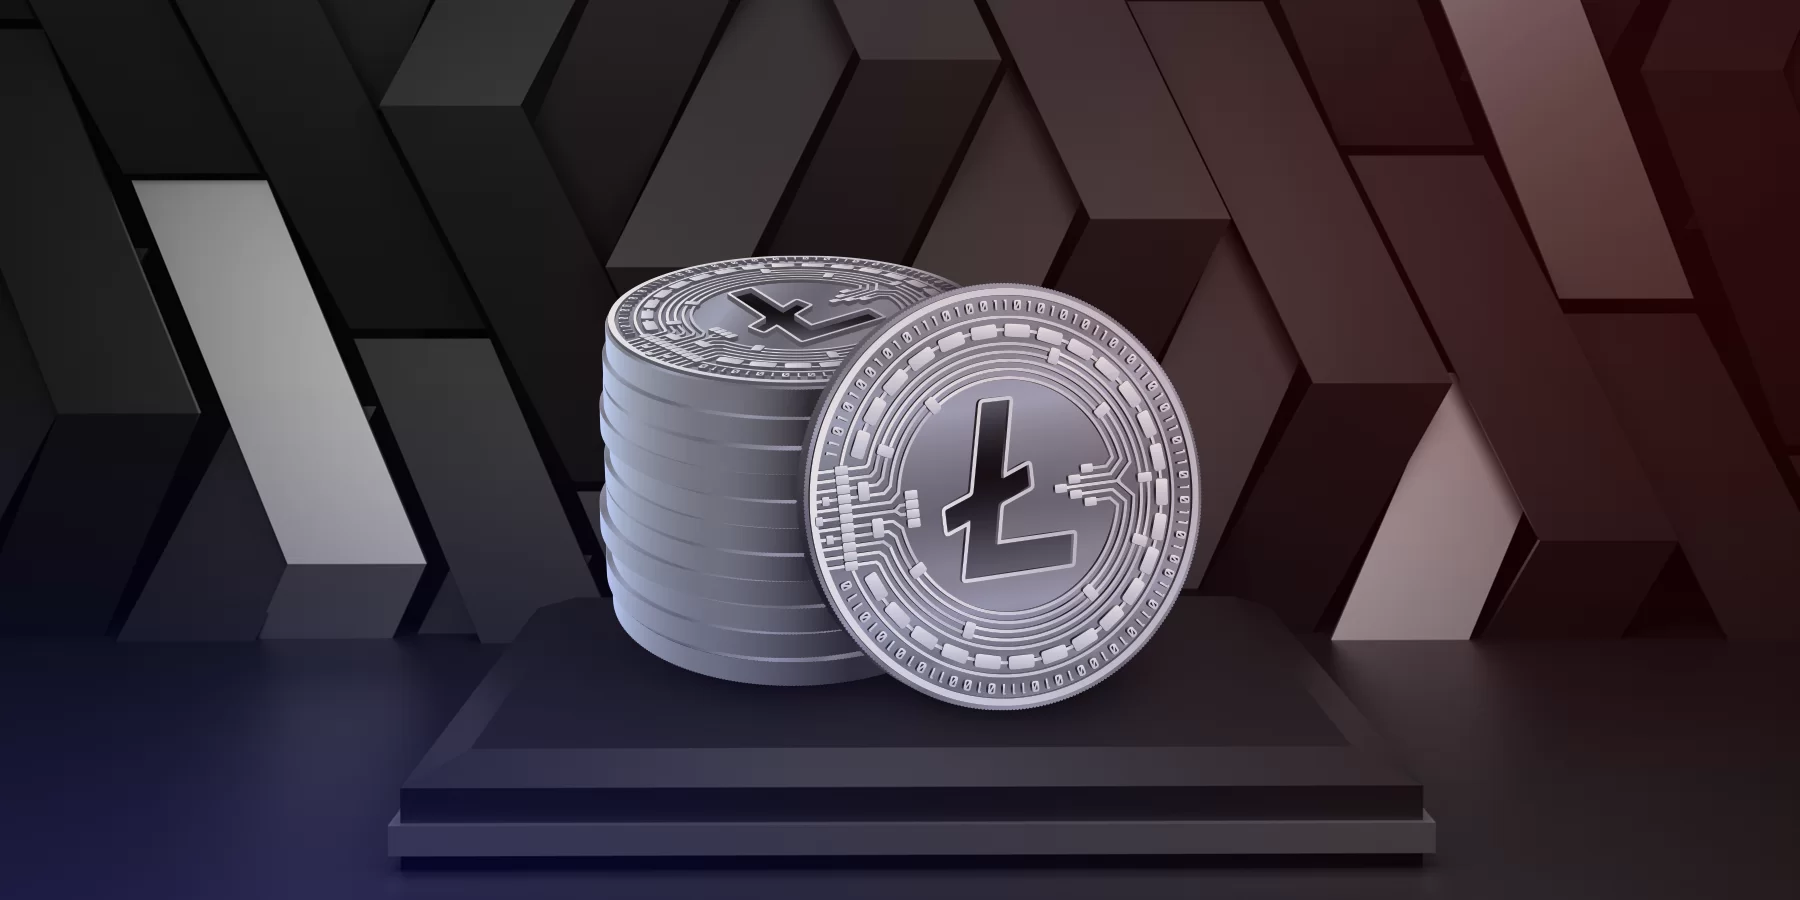 Litecoin’s Confidential Transactions Lead to Warnings by Korean Exchanges